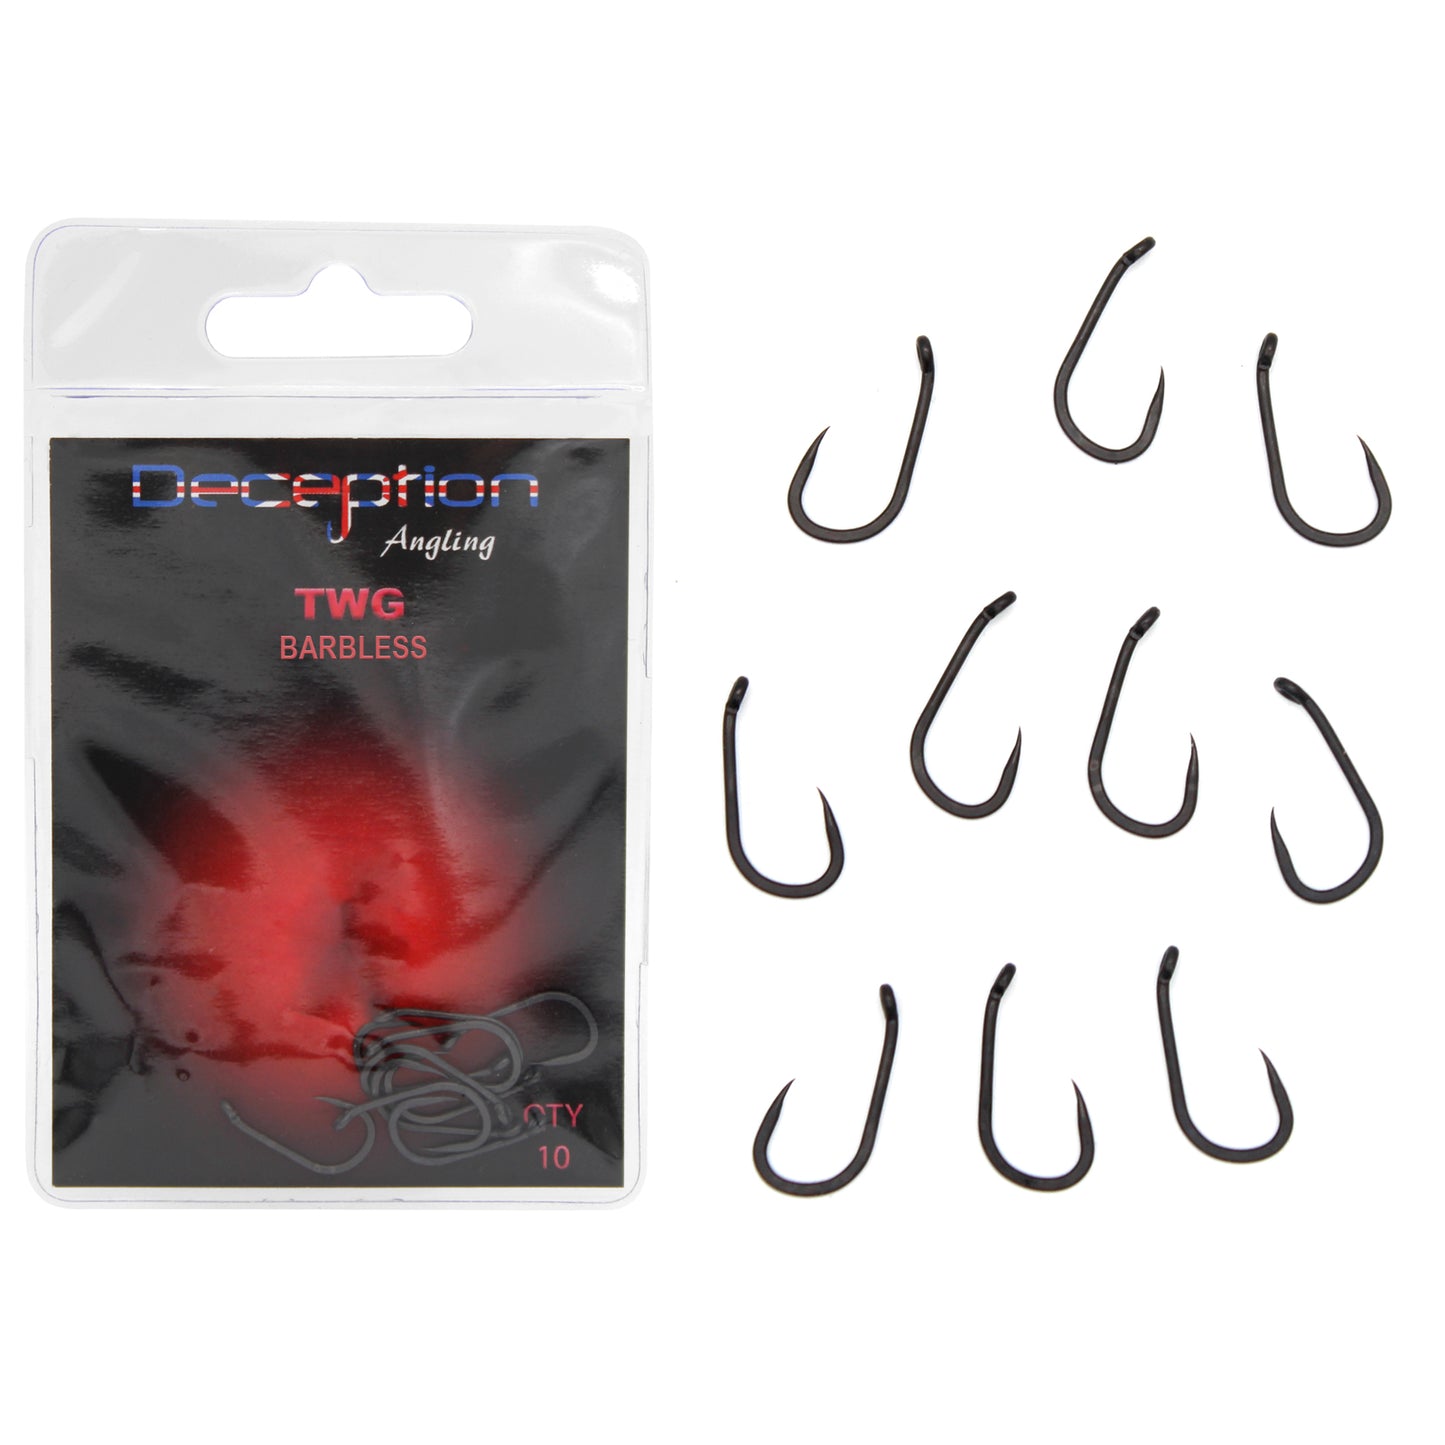 Deception Angling TWG Barbless Fishing Hooks Pack of 10